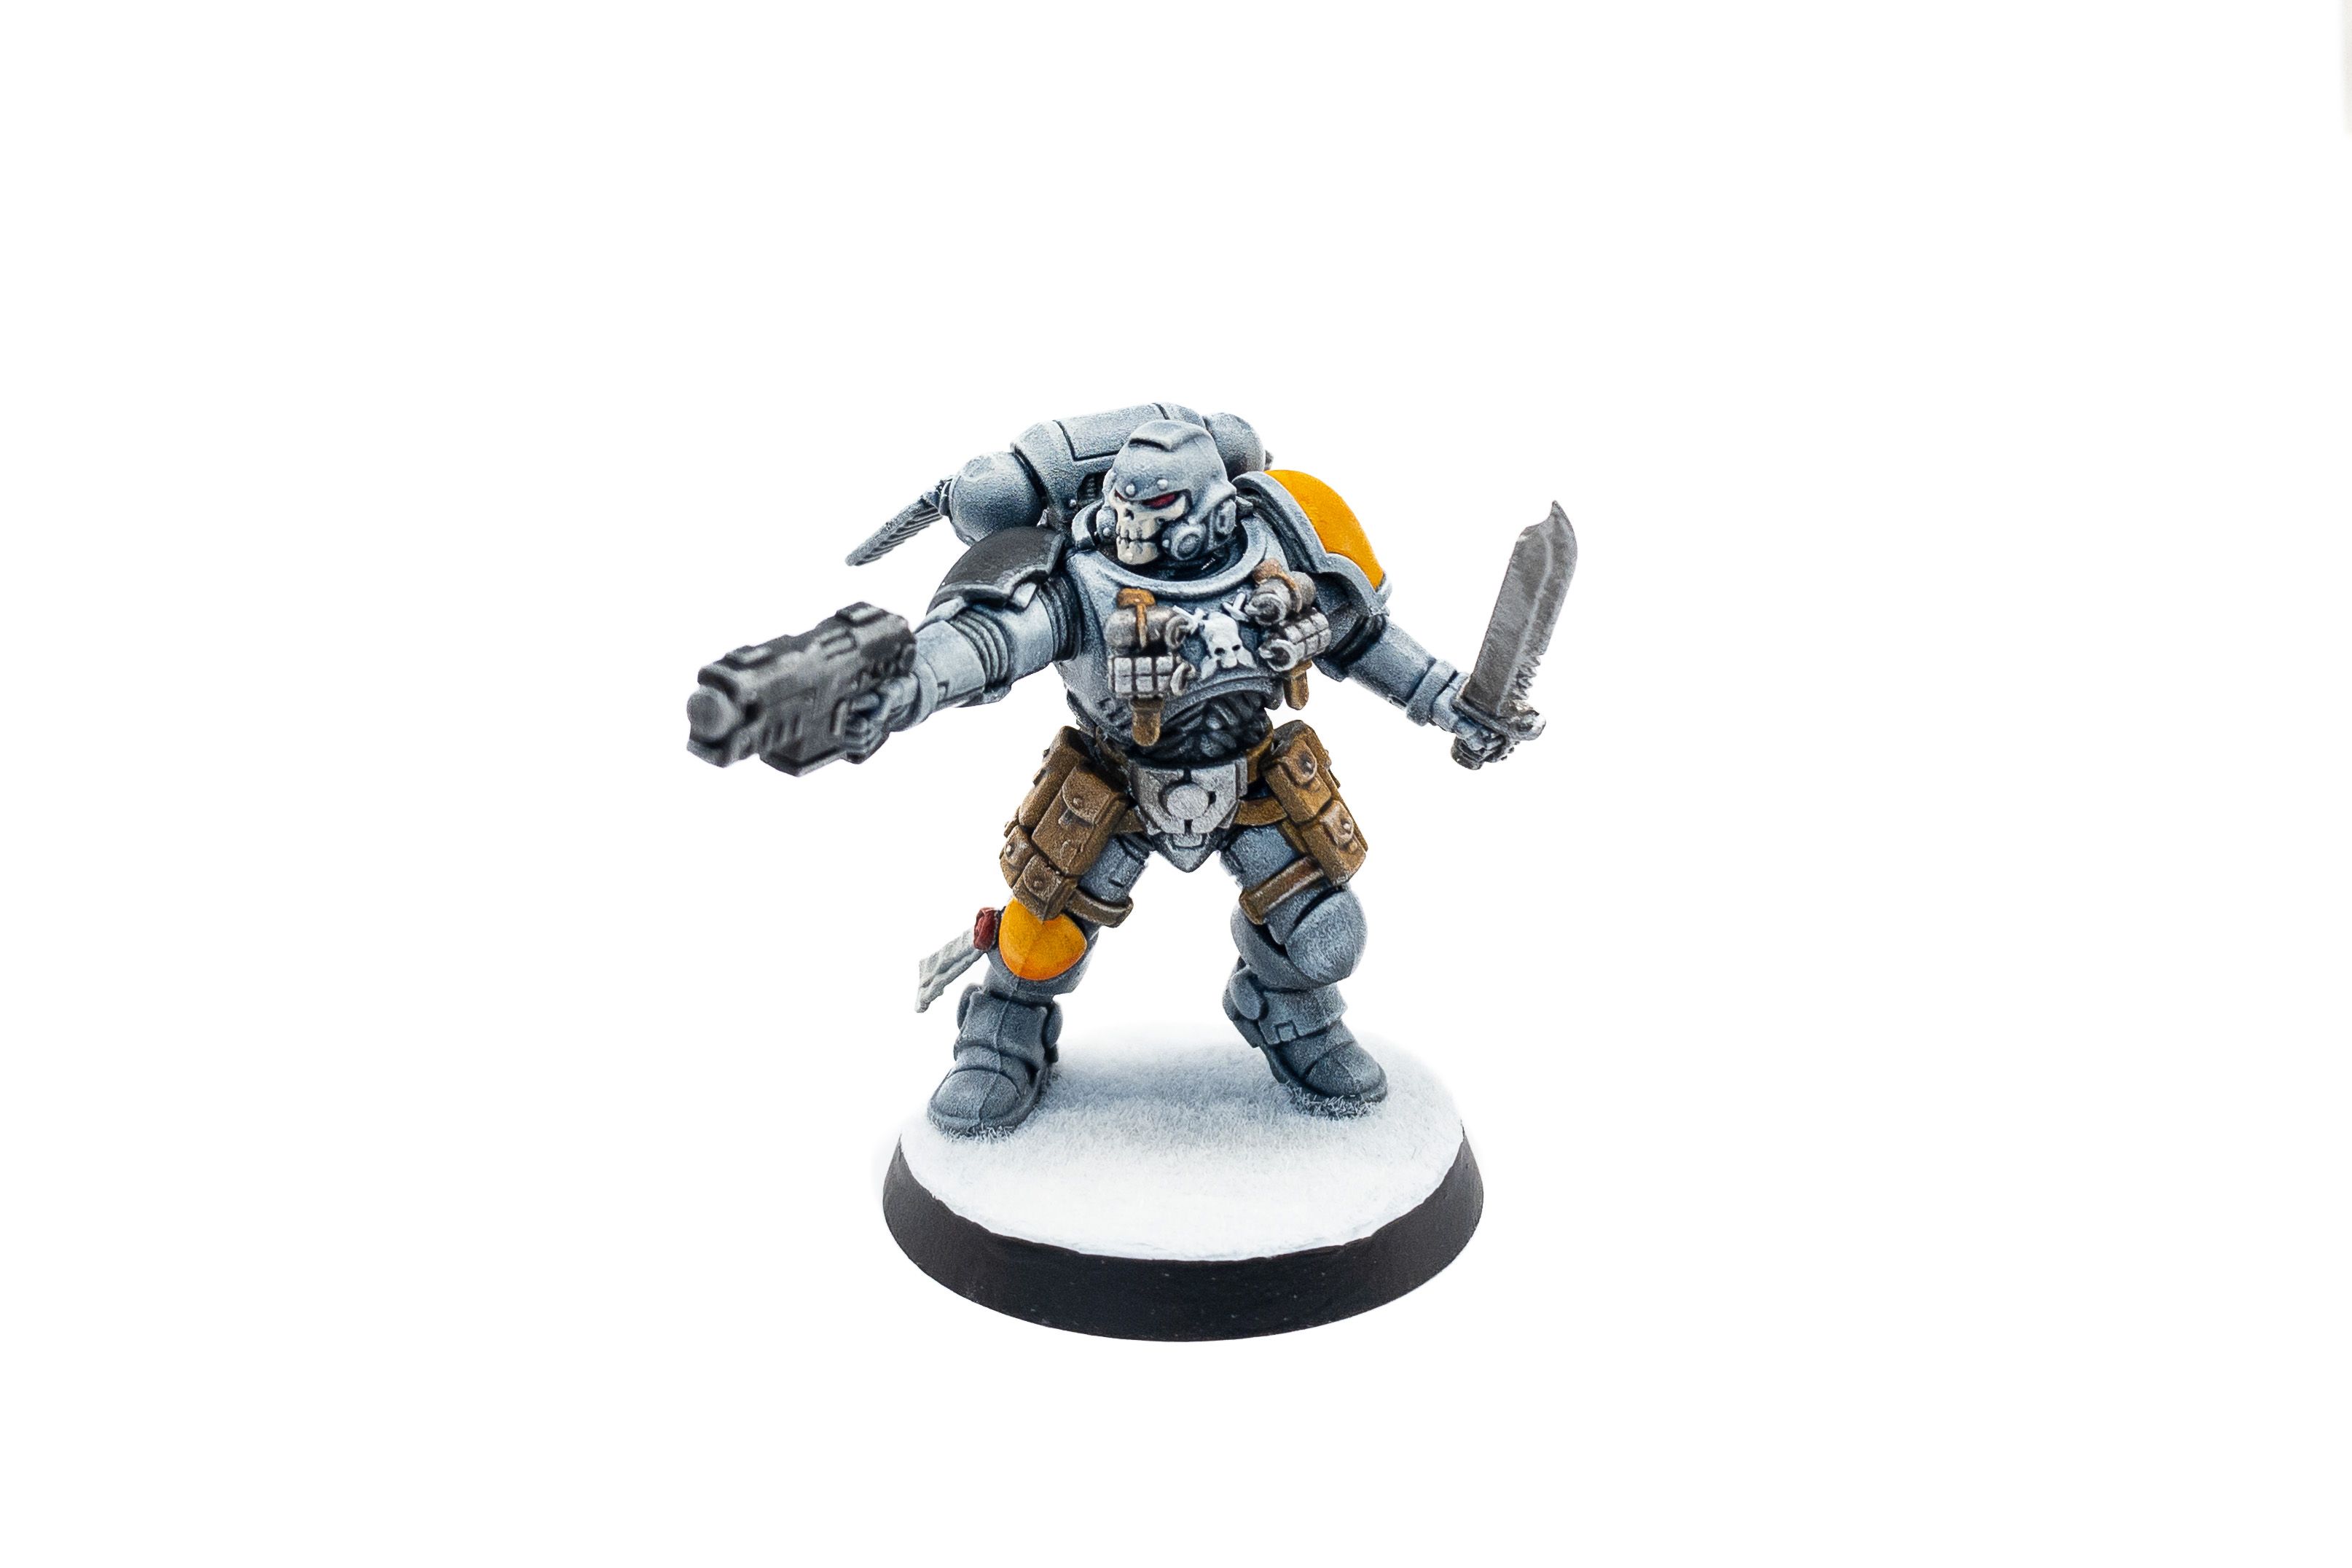 A photo of a Space Marine Reiver painted in Space Wolves colours (primarily blue-grey with a yellow shoulder pad). He's heavily-armoured with a helmet that has a skull design on the front, and is aiming a pistol and wielding a huge combat knife in the other hand.